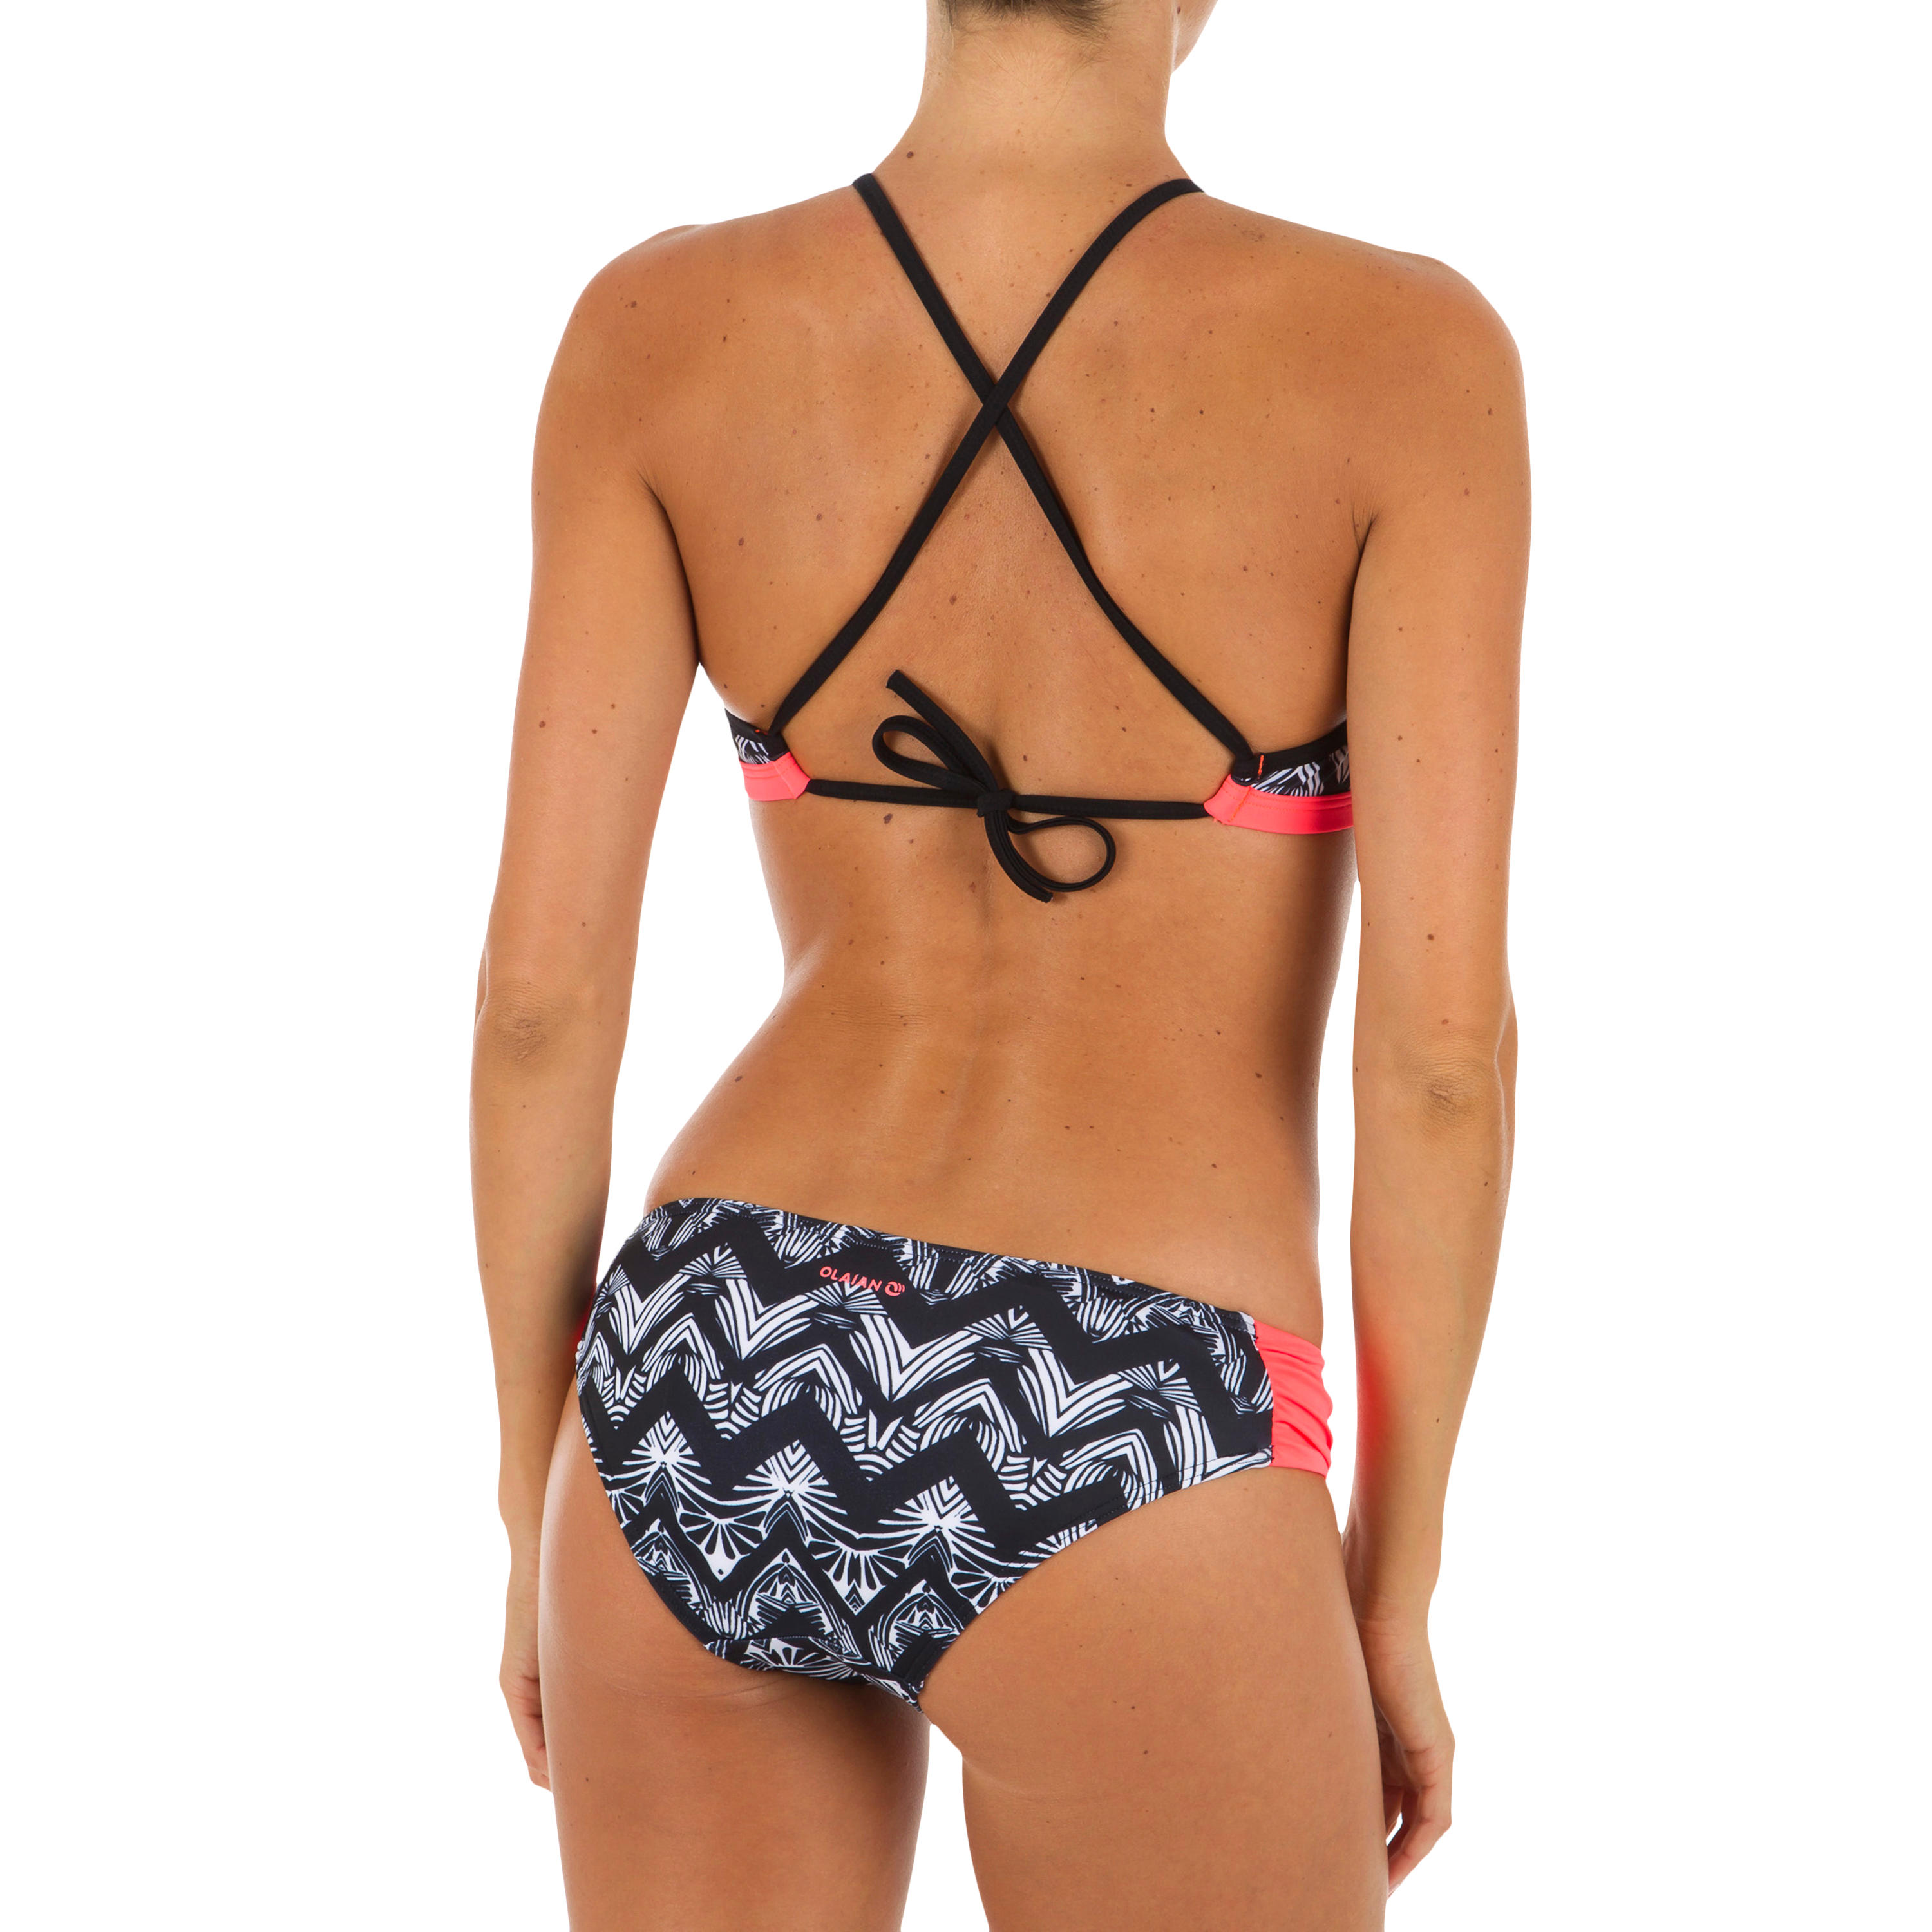 Women's surfing swimsuit bottoms with gathering at the sides NIKI MAWA 10/11